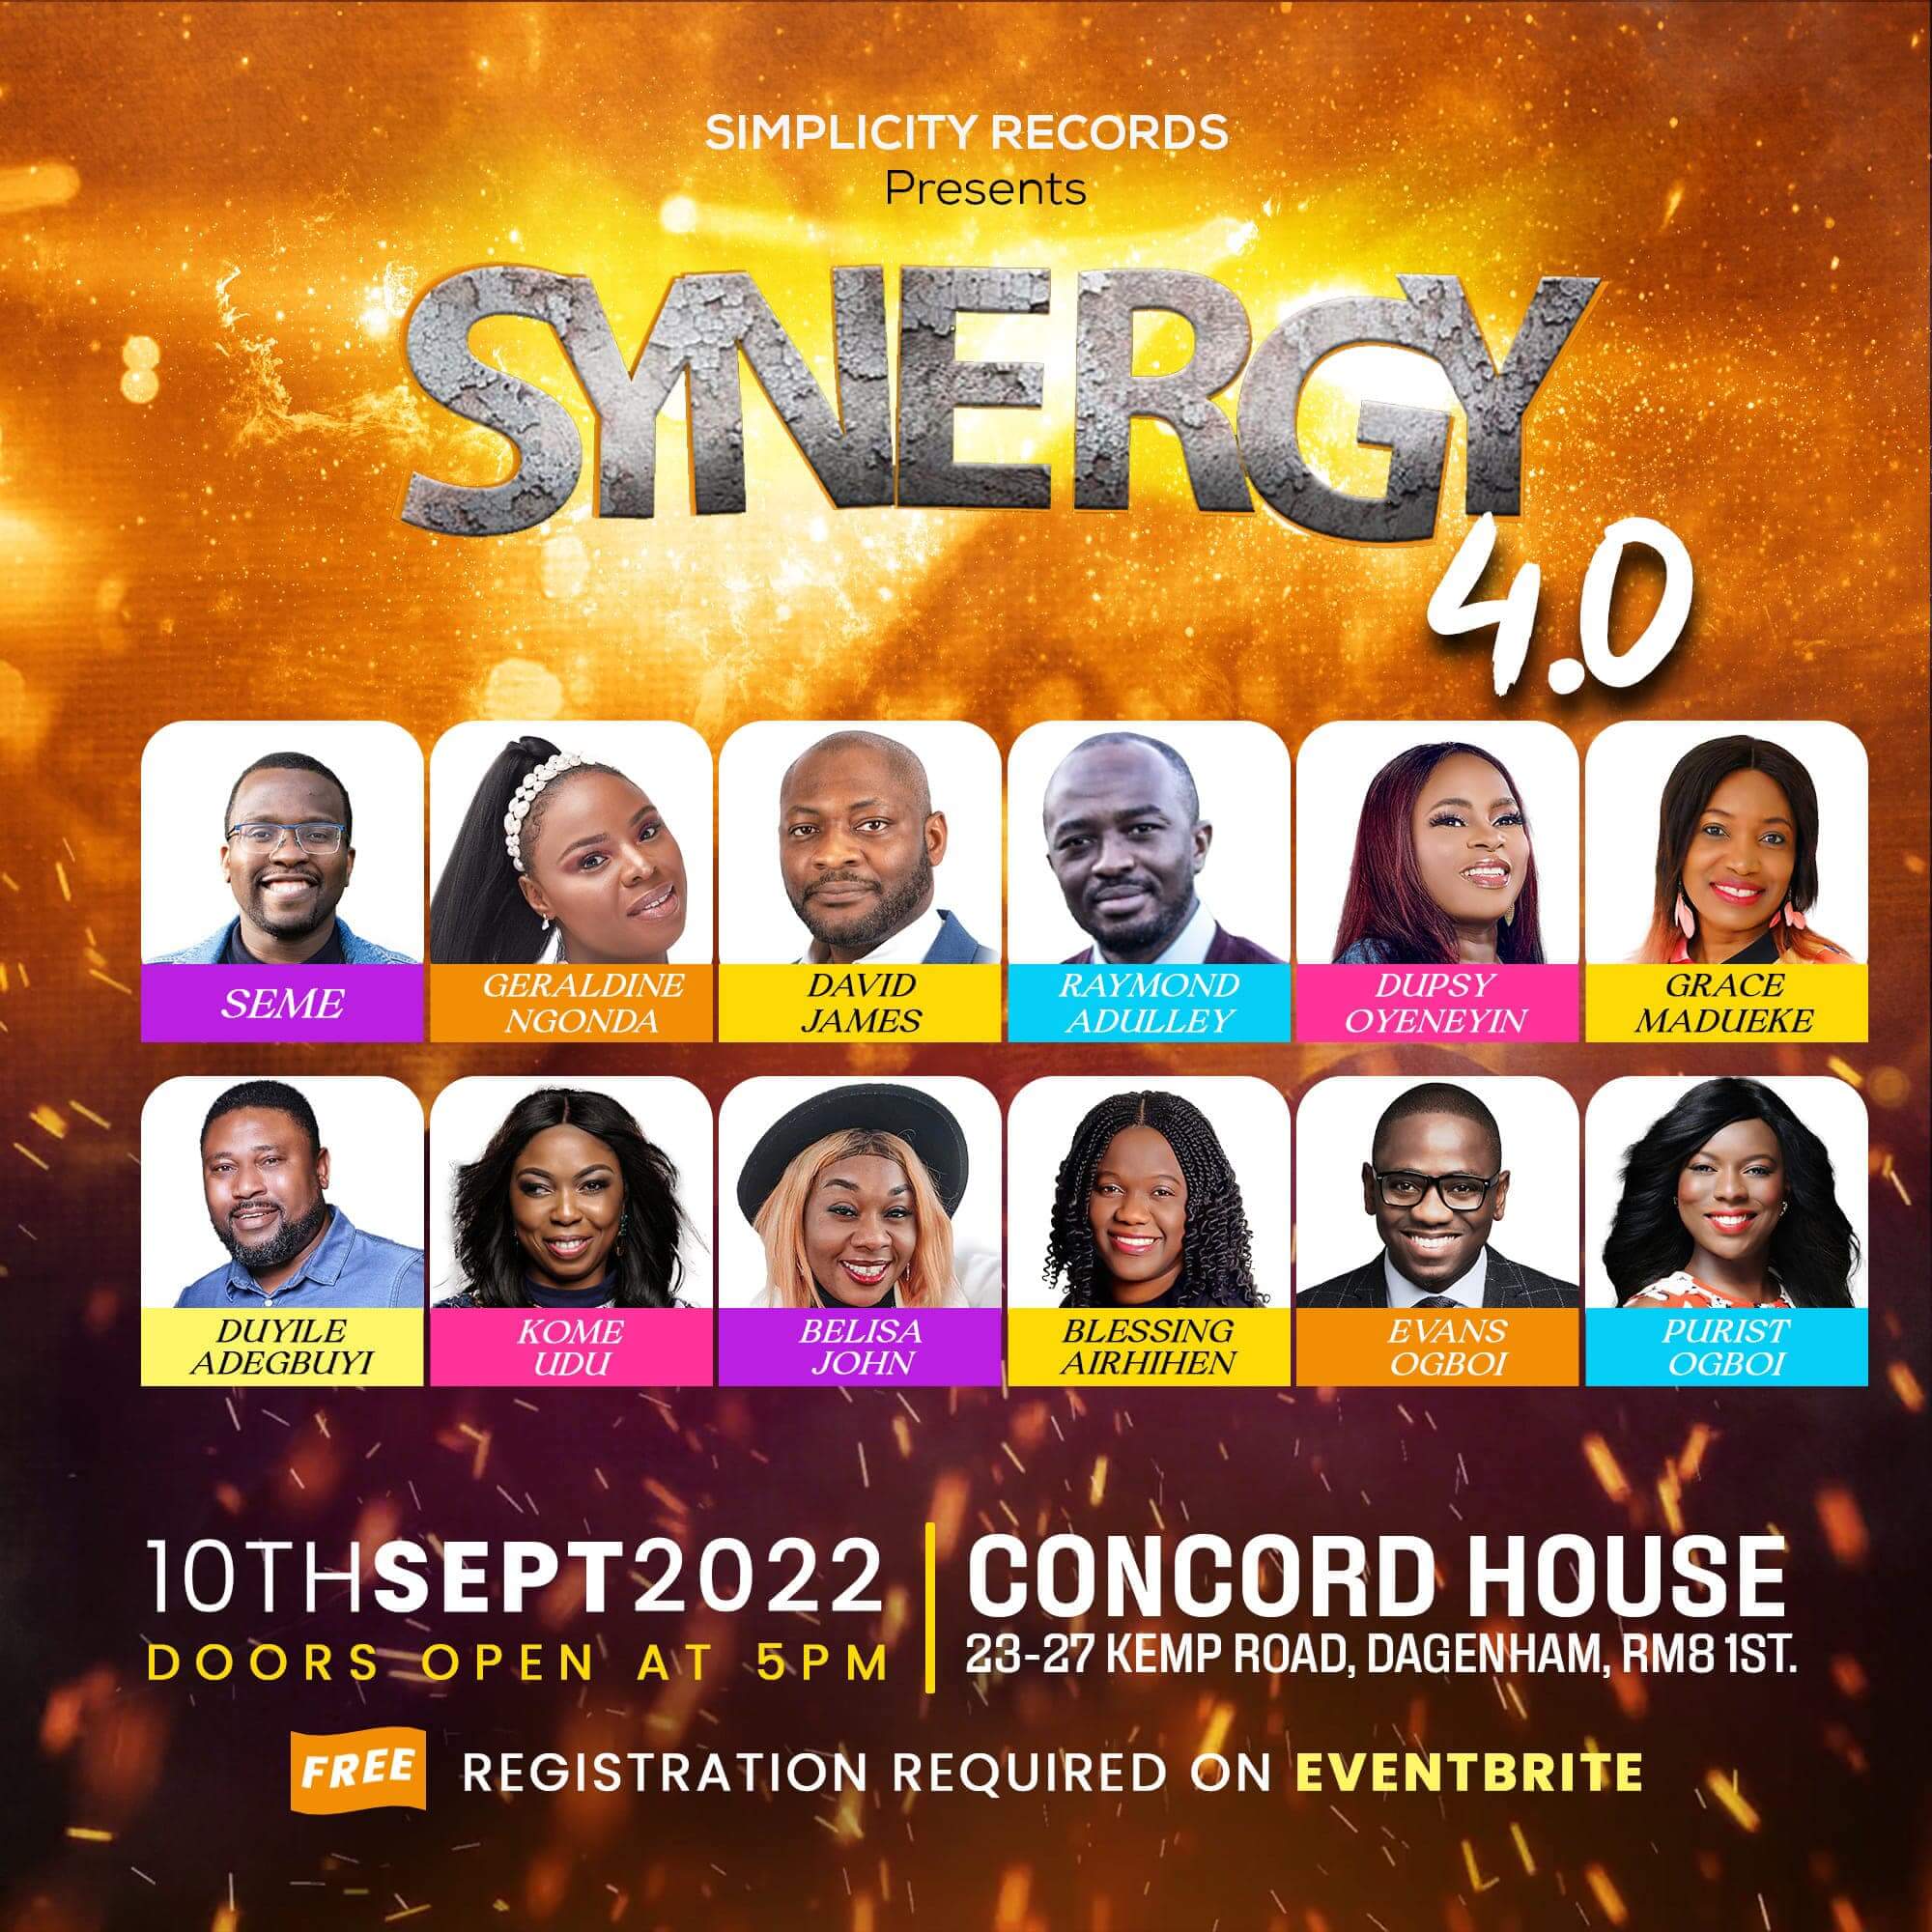 Simplicity Records Presents Synergy 4.0 Live Recording Concert